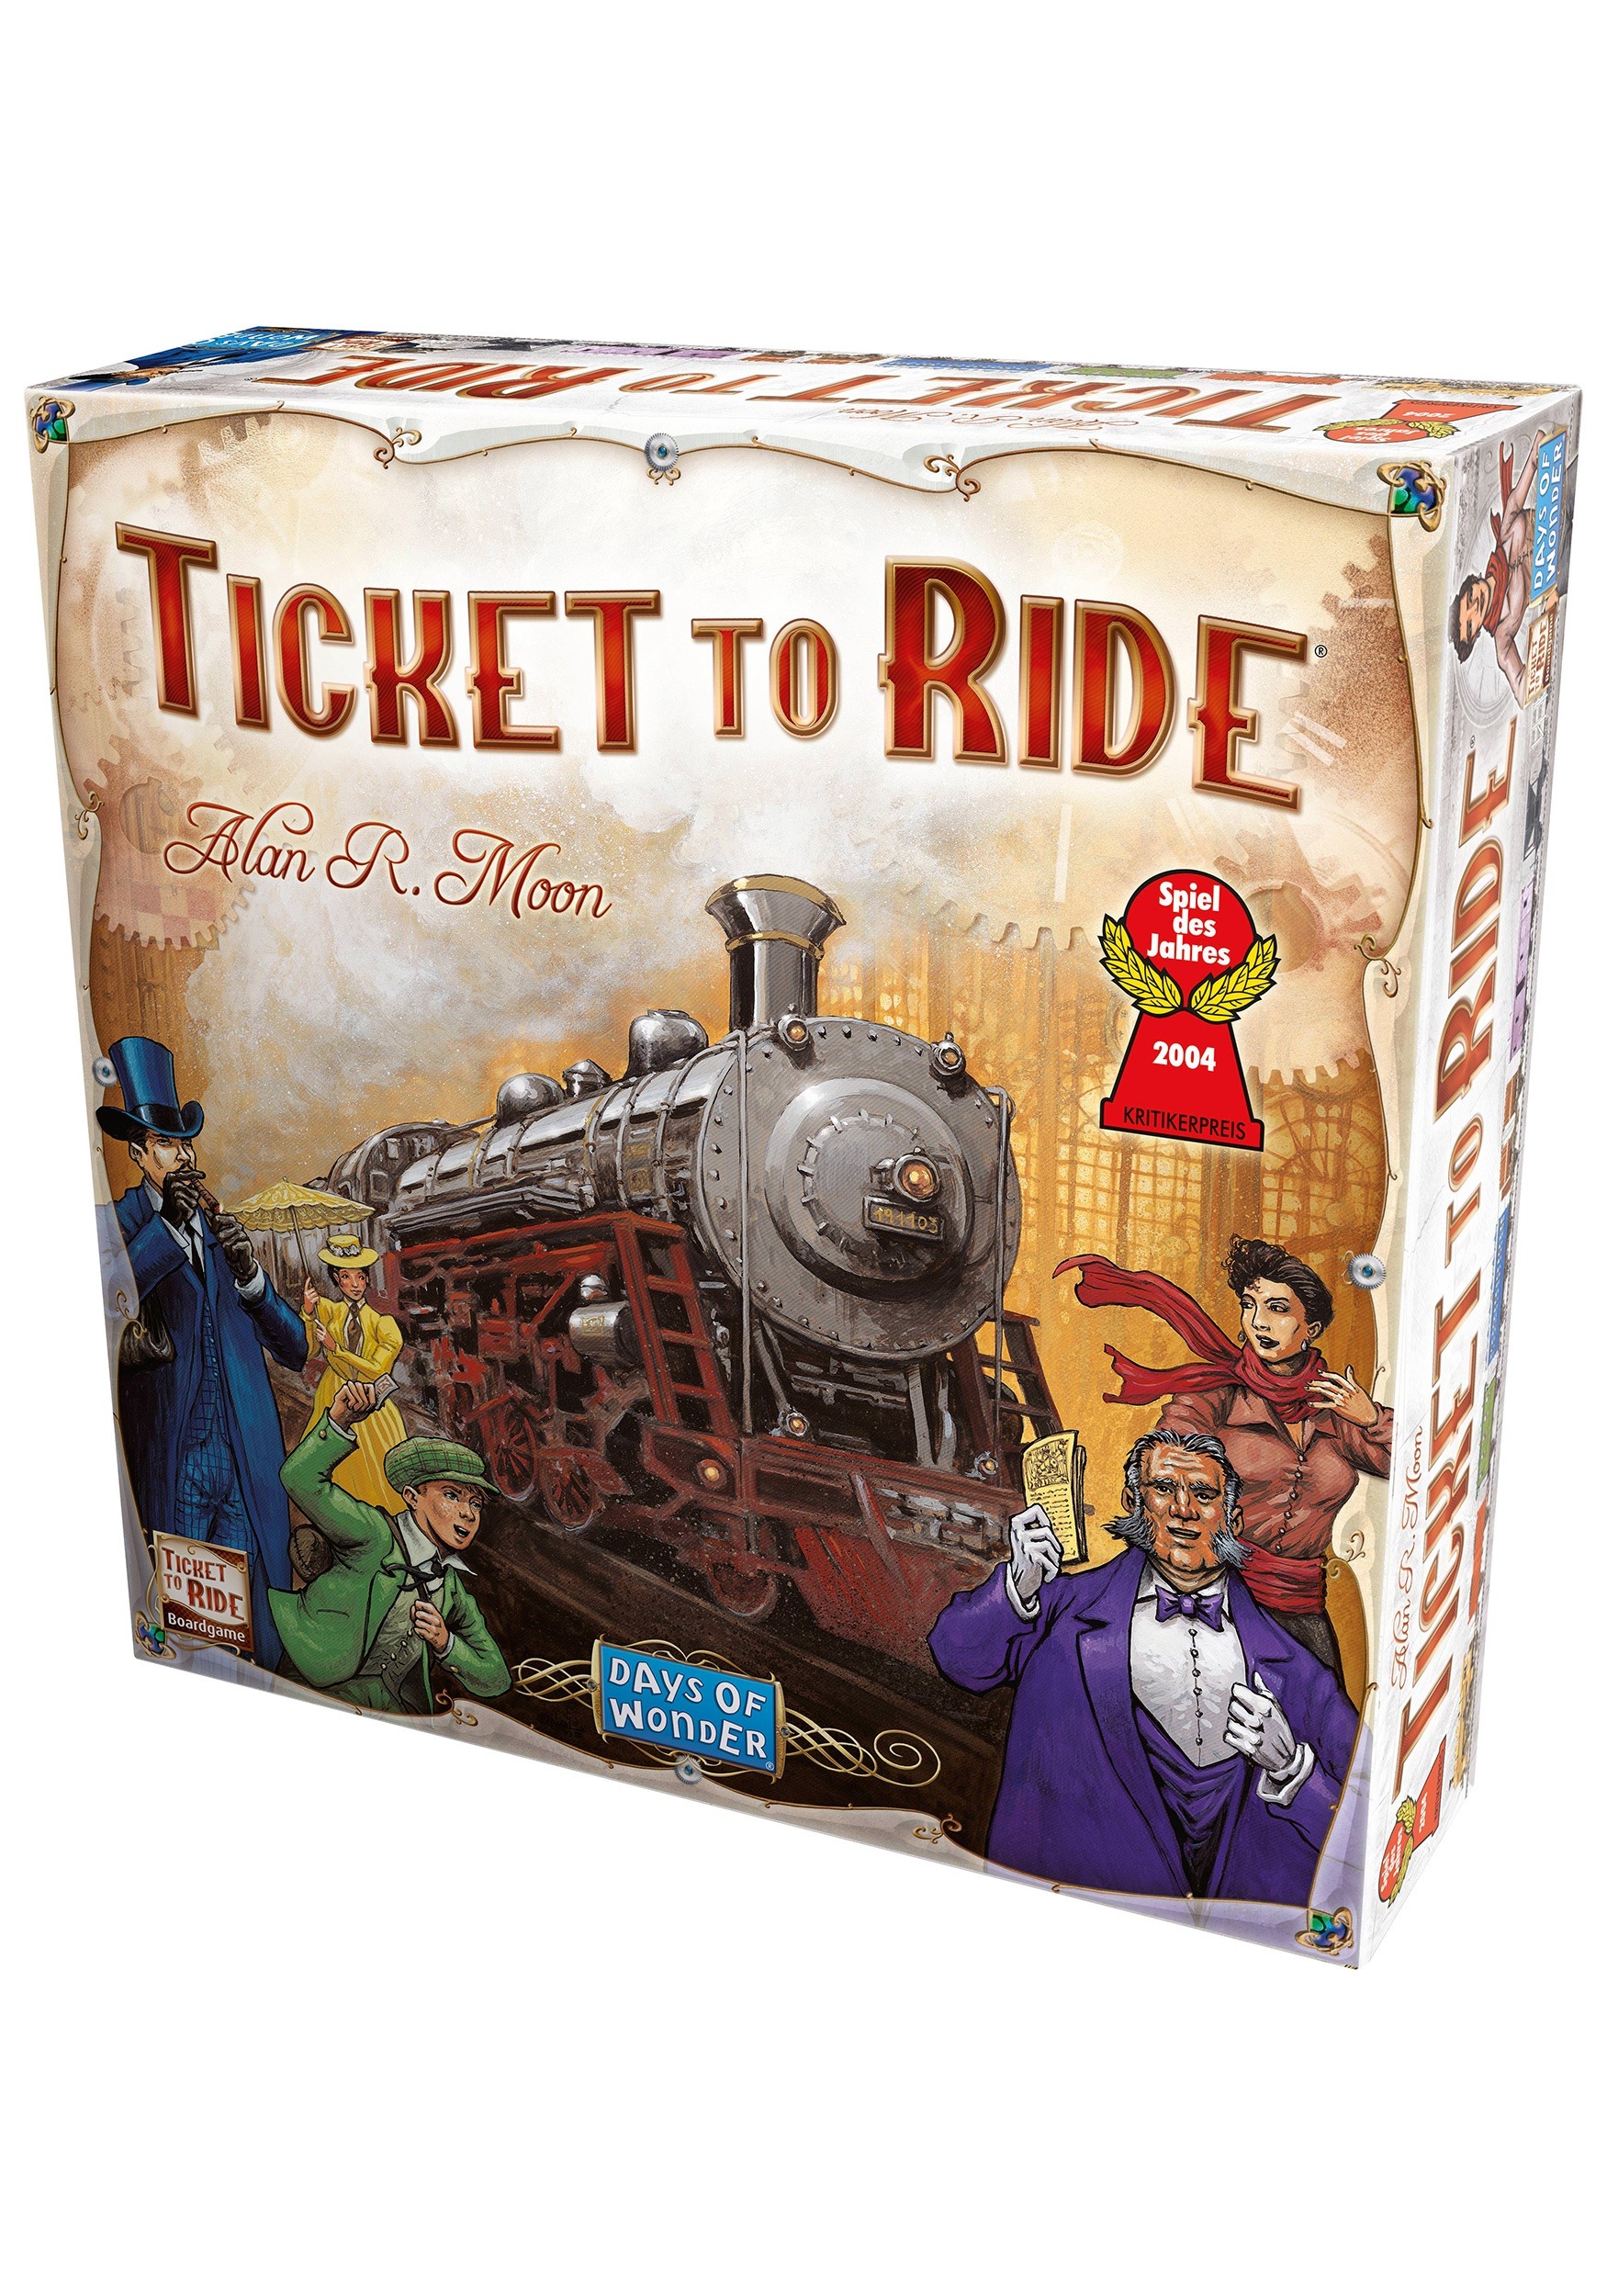 Asmodee Ticket to Ride Board Game